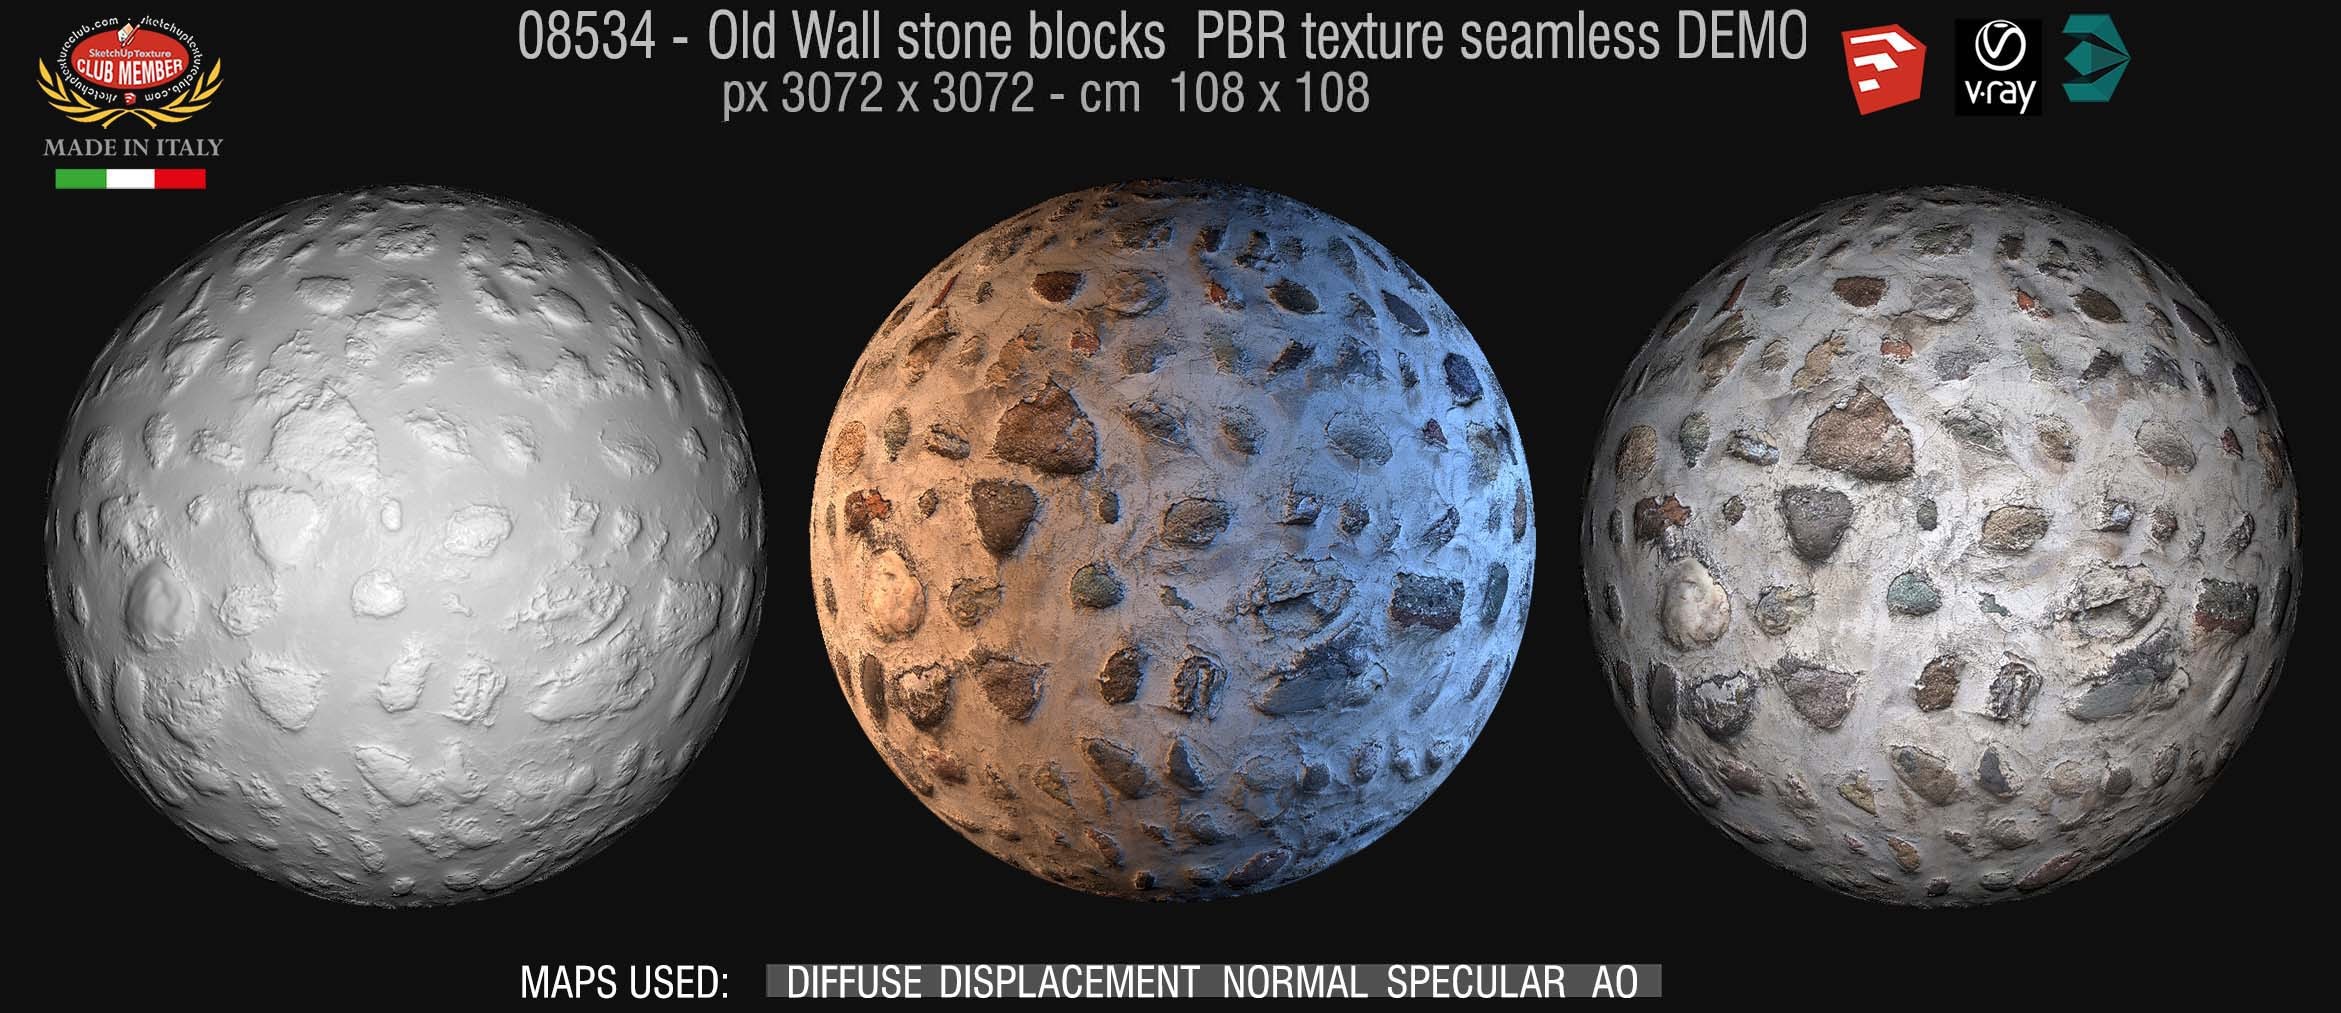 08534 Old wall stone PBR texture seamless DEMO